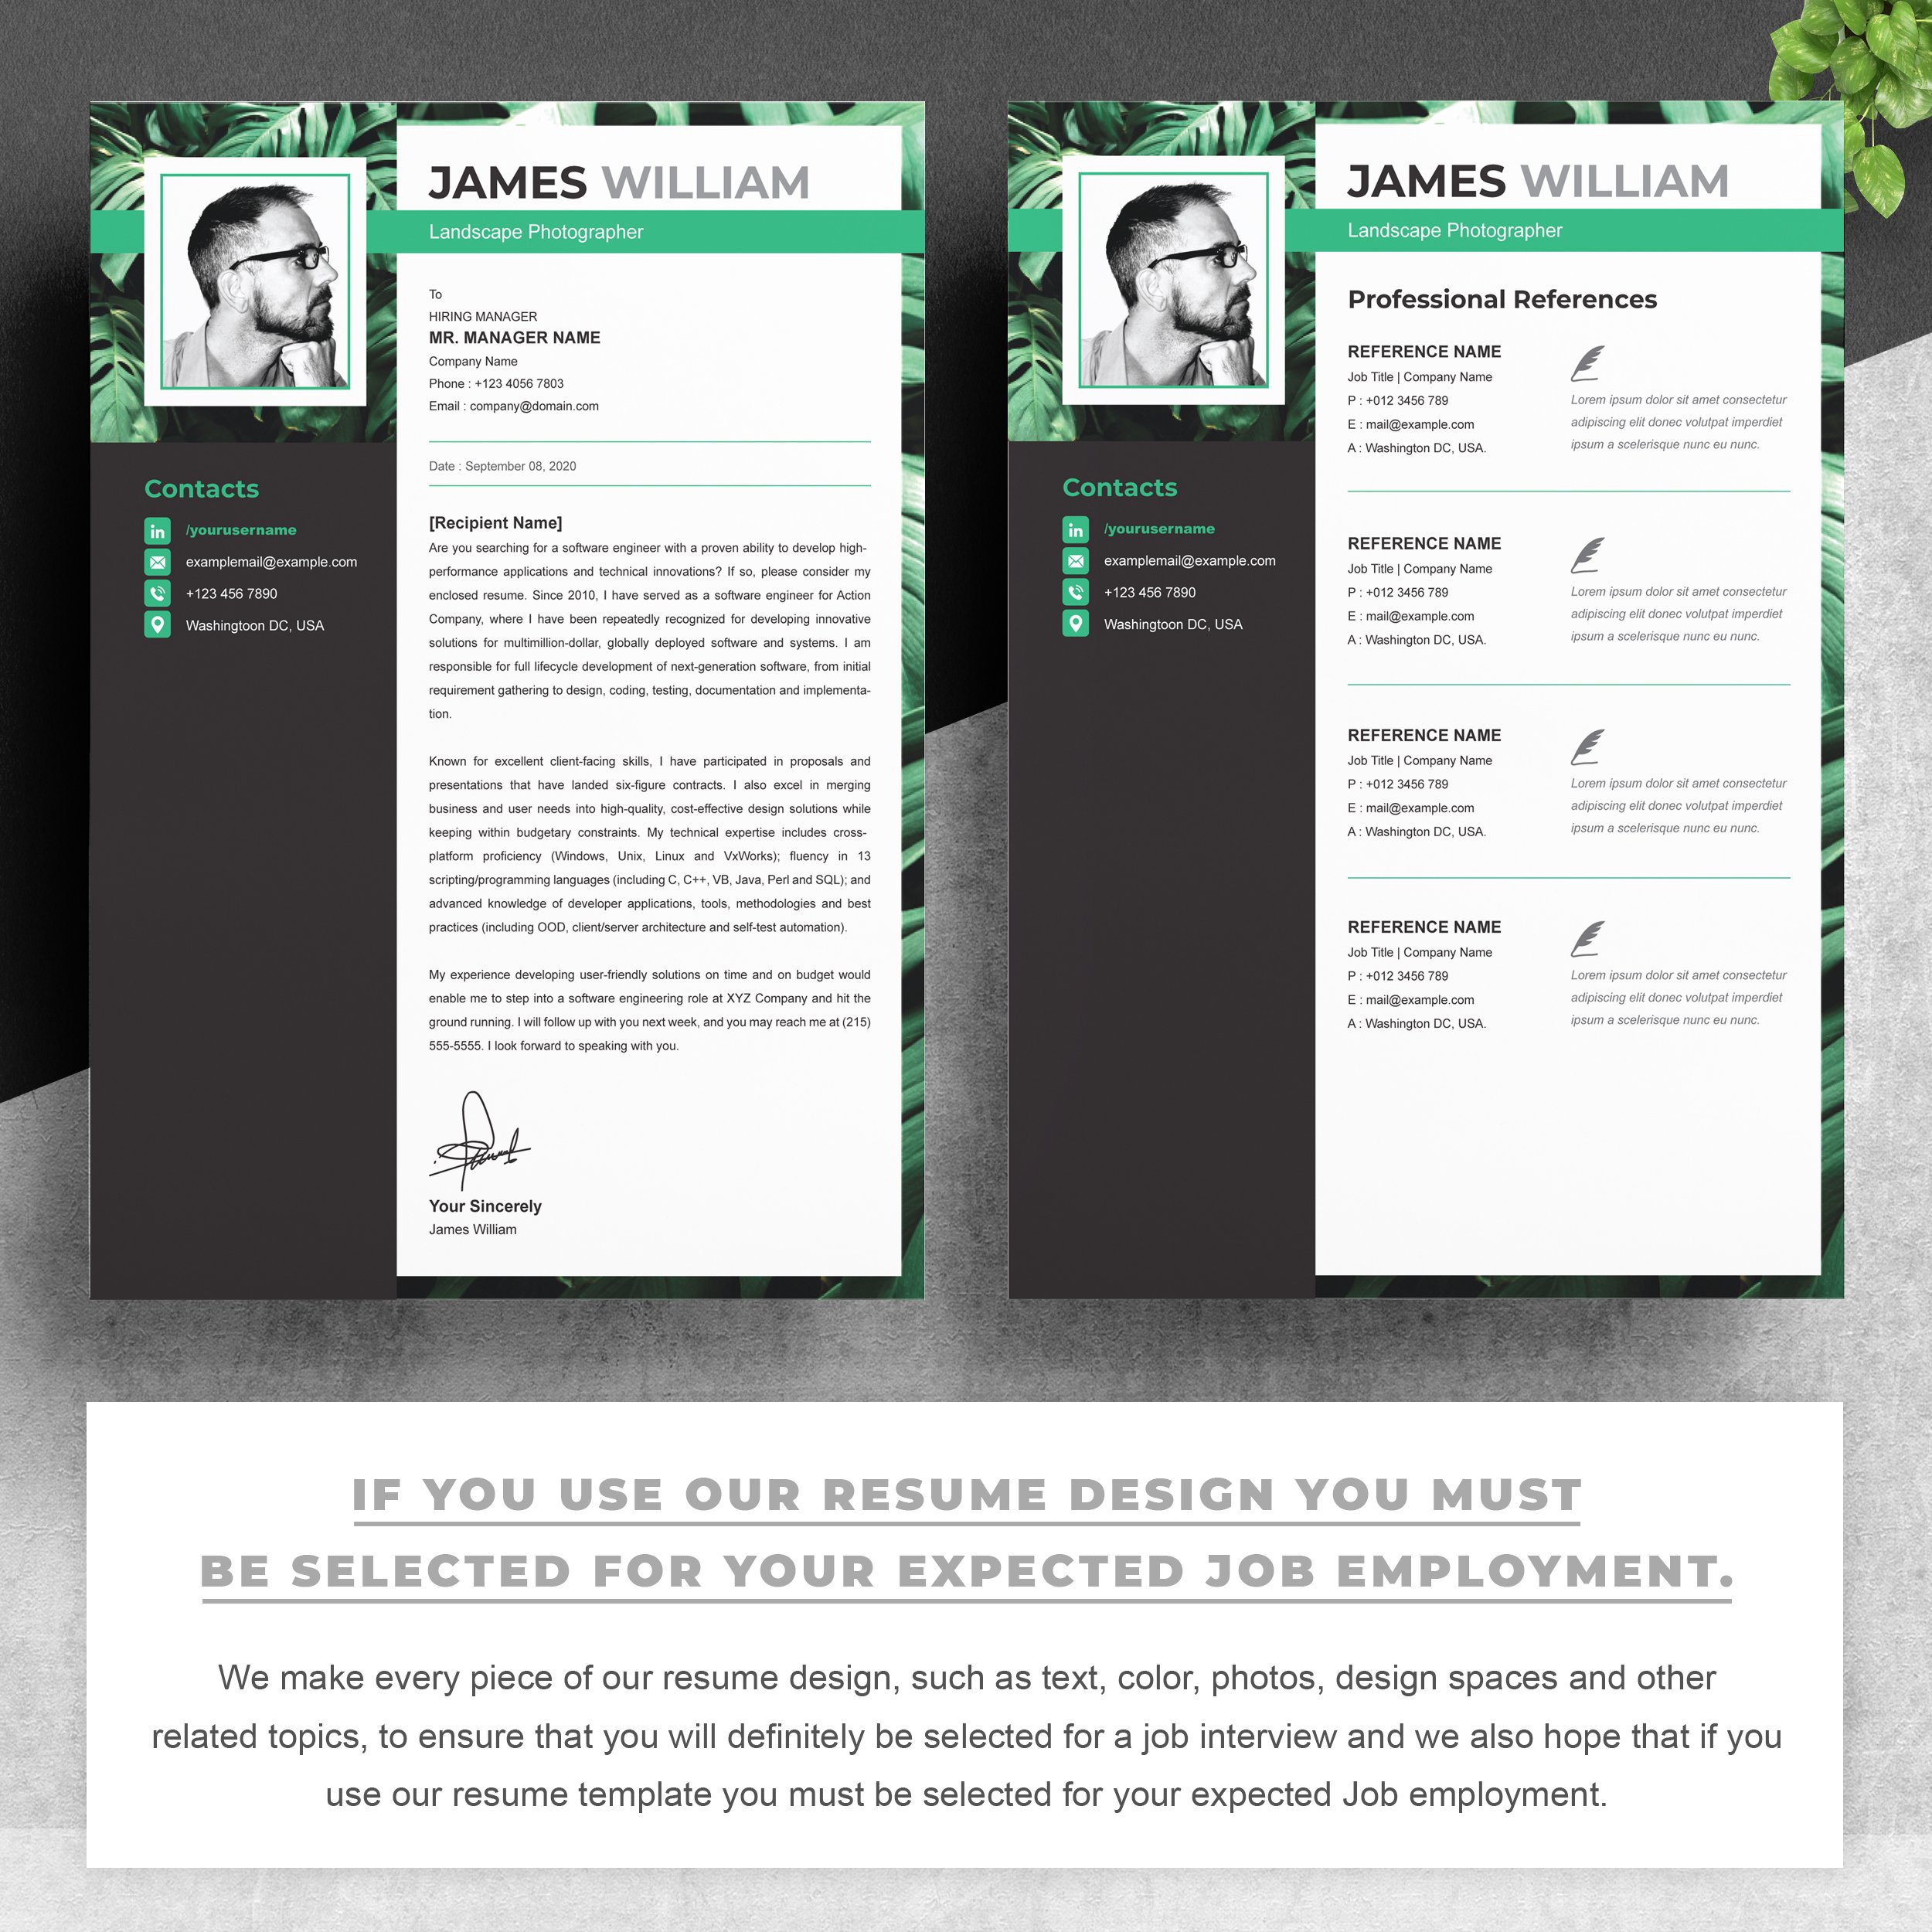 03 2 pages free resume design template copy 764